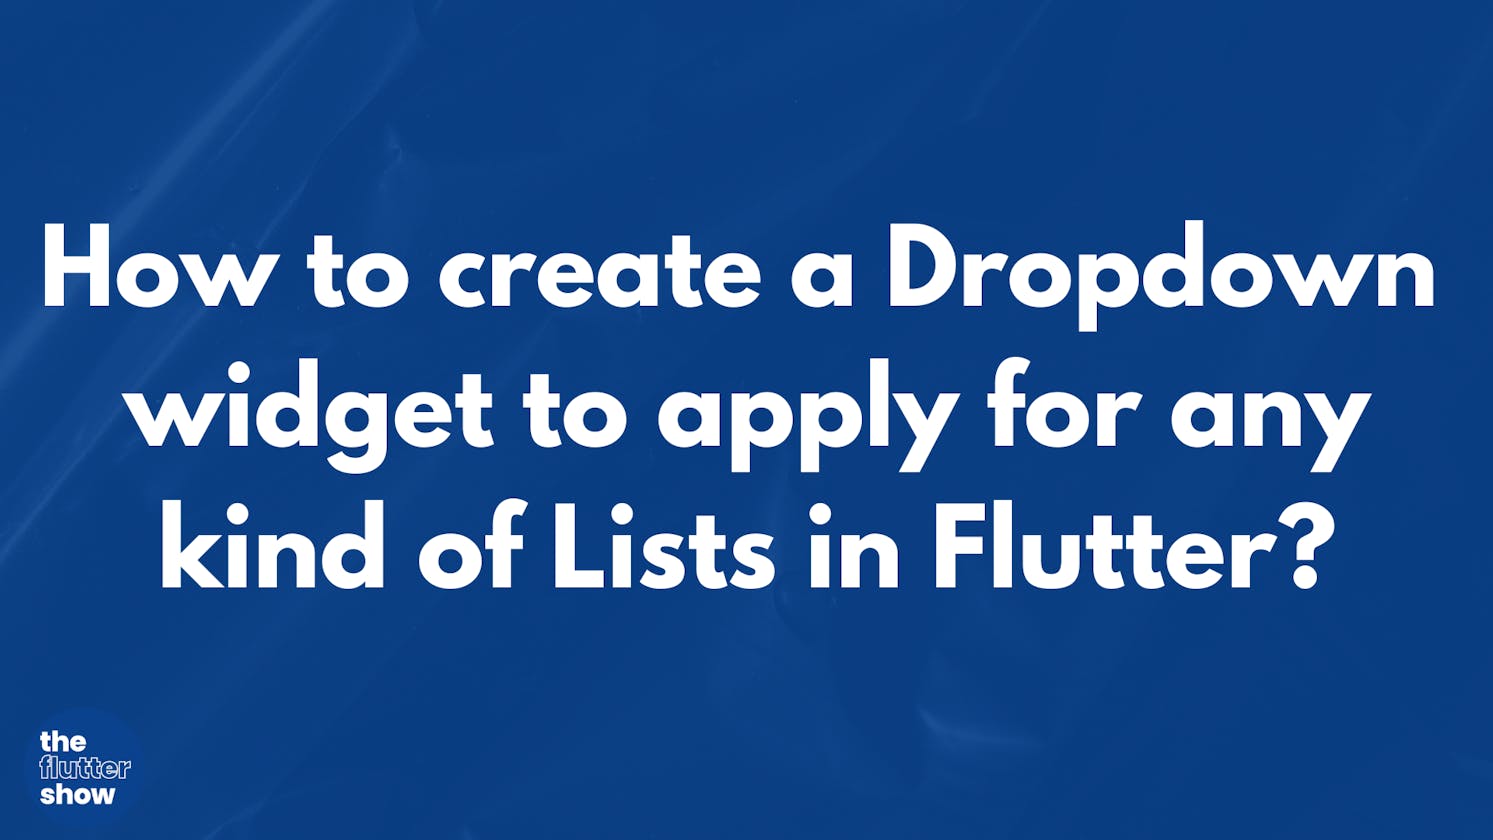 How to create a Dropdown widget to apply for any kind of Lists in Flutter?